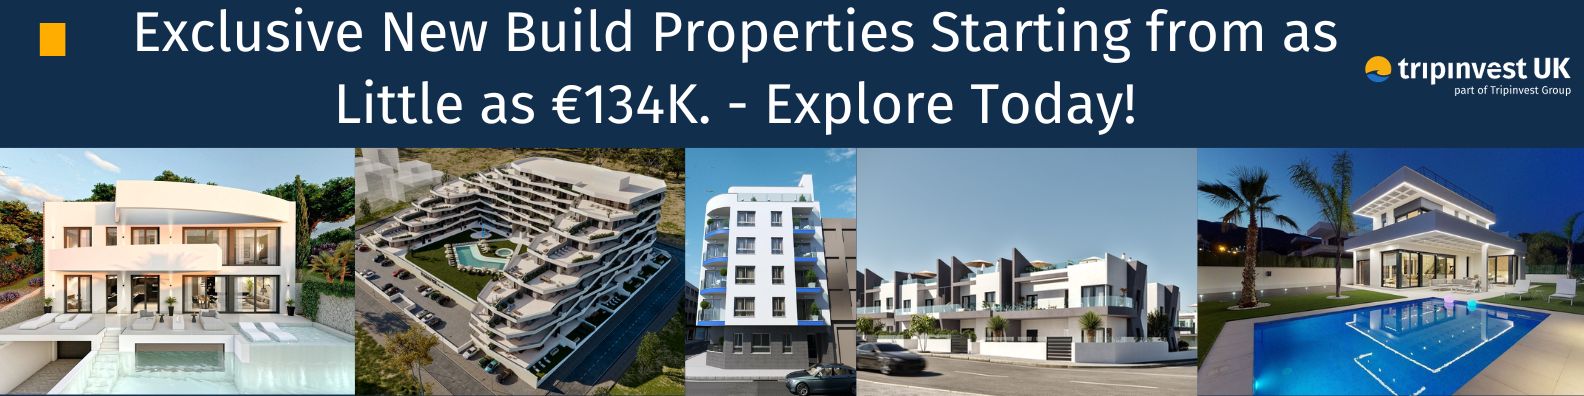 Discover New Builds From 139K with Tripinvest UK